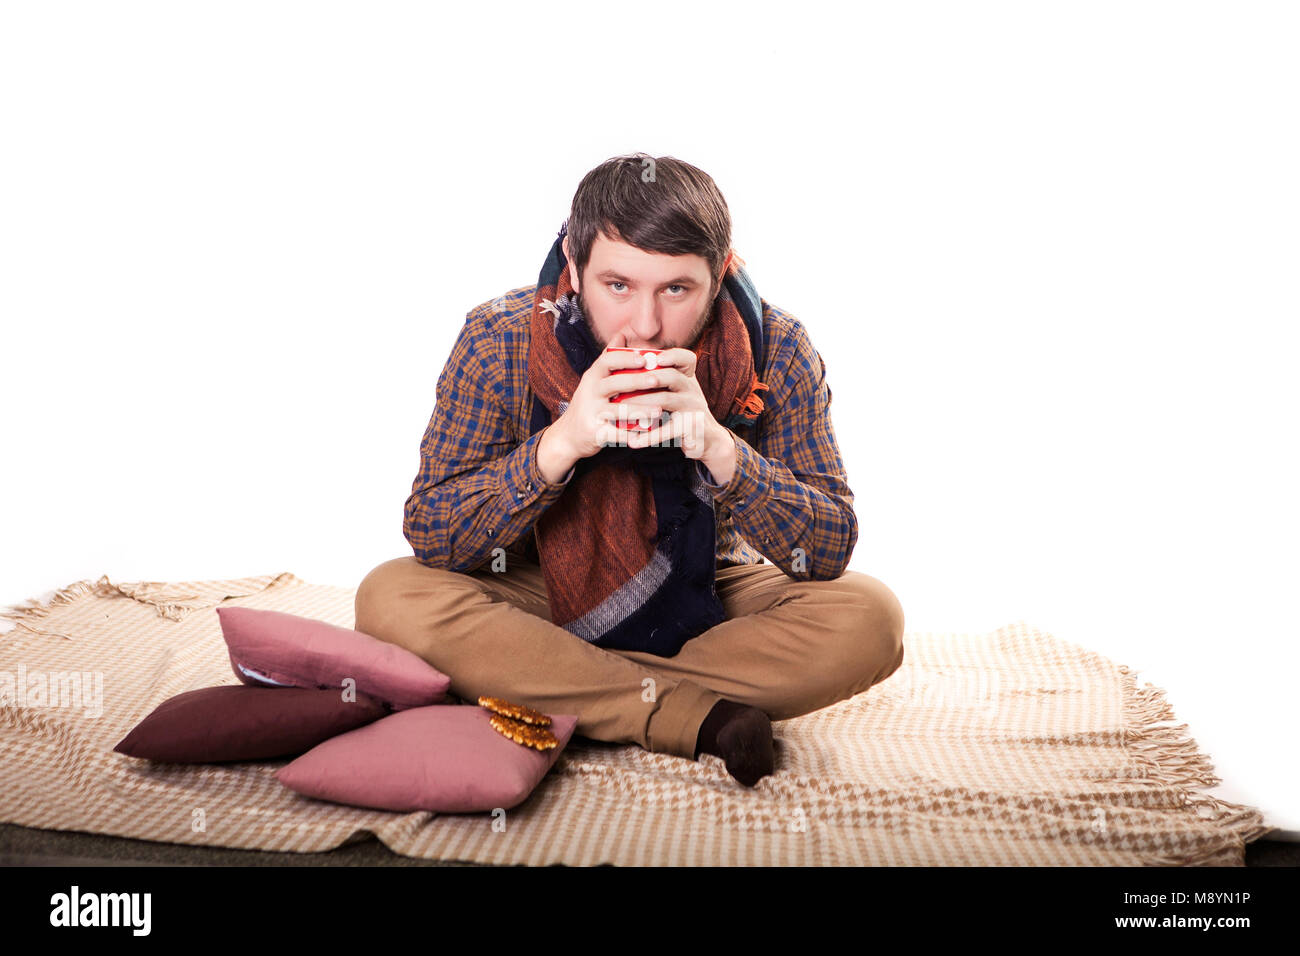 cold man with flu wrapped in a warm blanket, holding a mug. Stock Photo